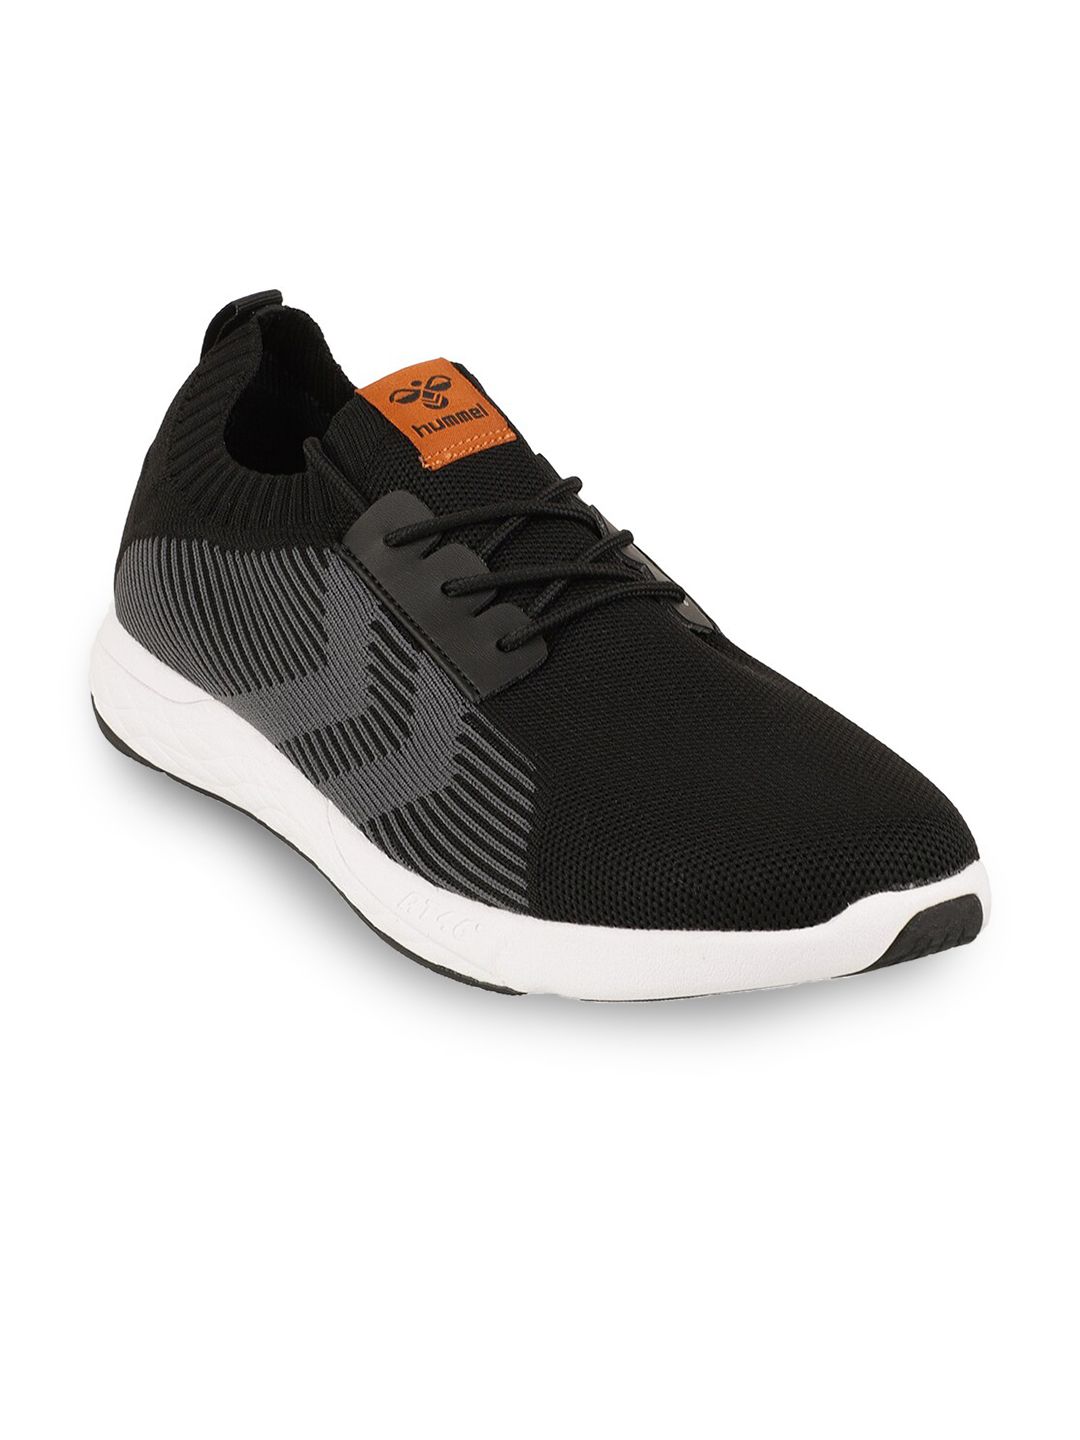 Hummel Unisex Black & Tan Sports Shoes Price in India